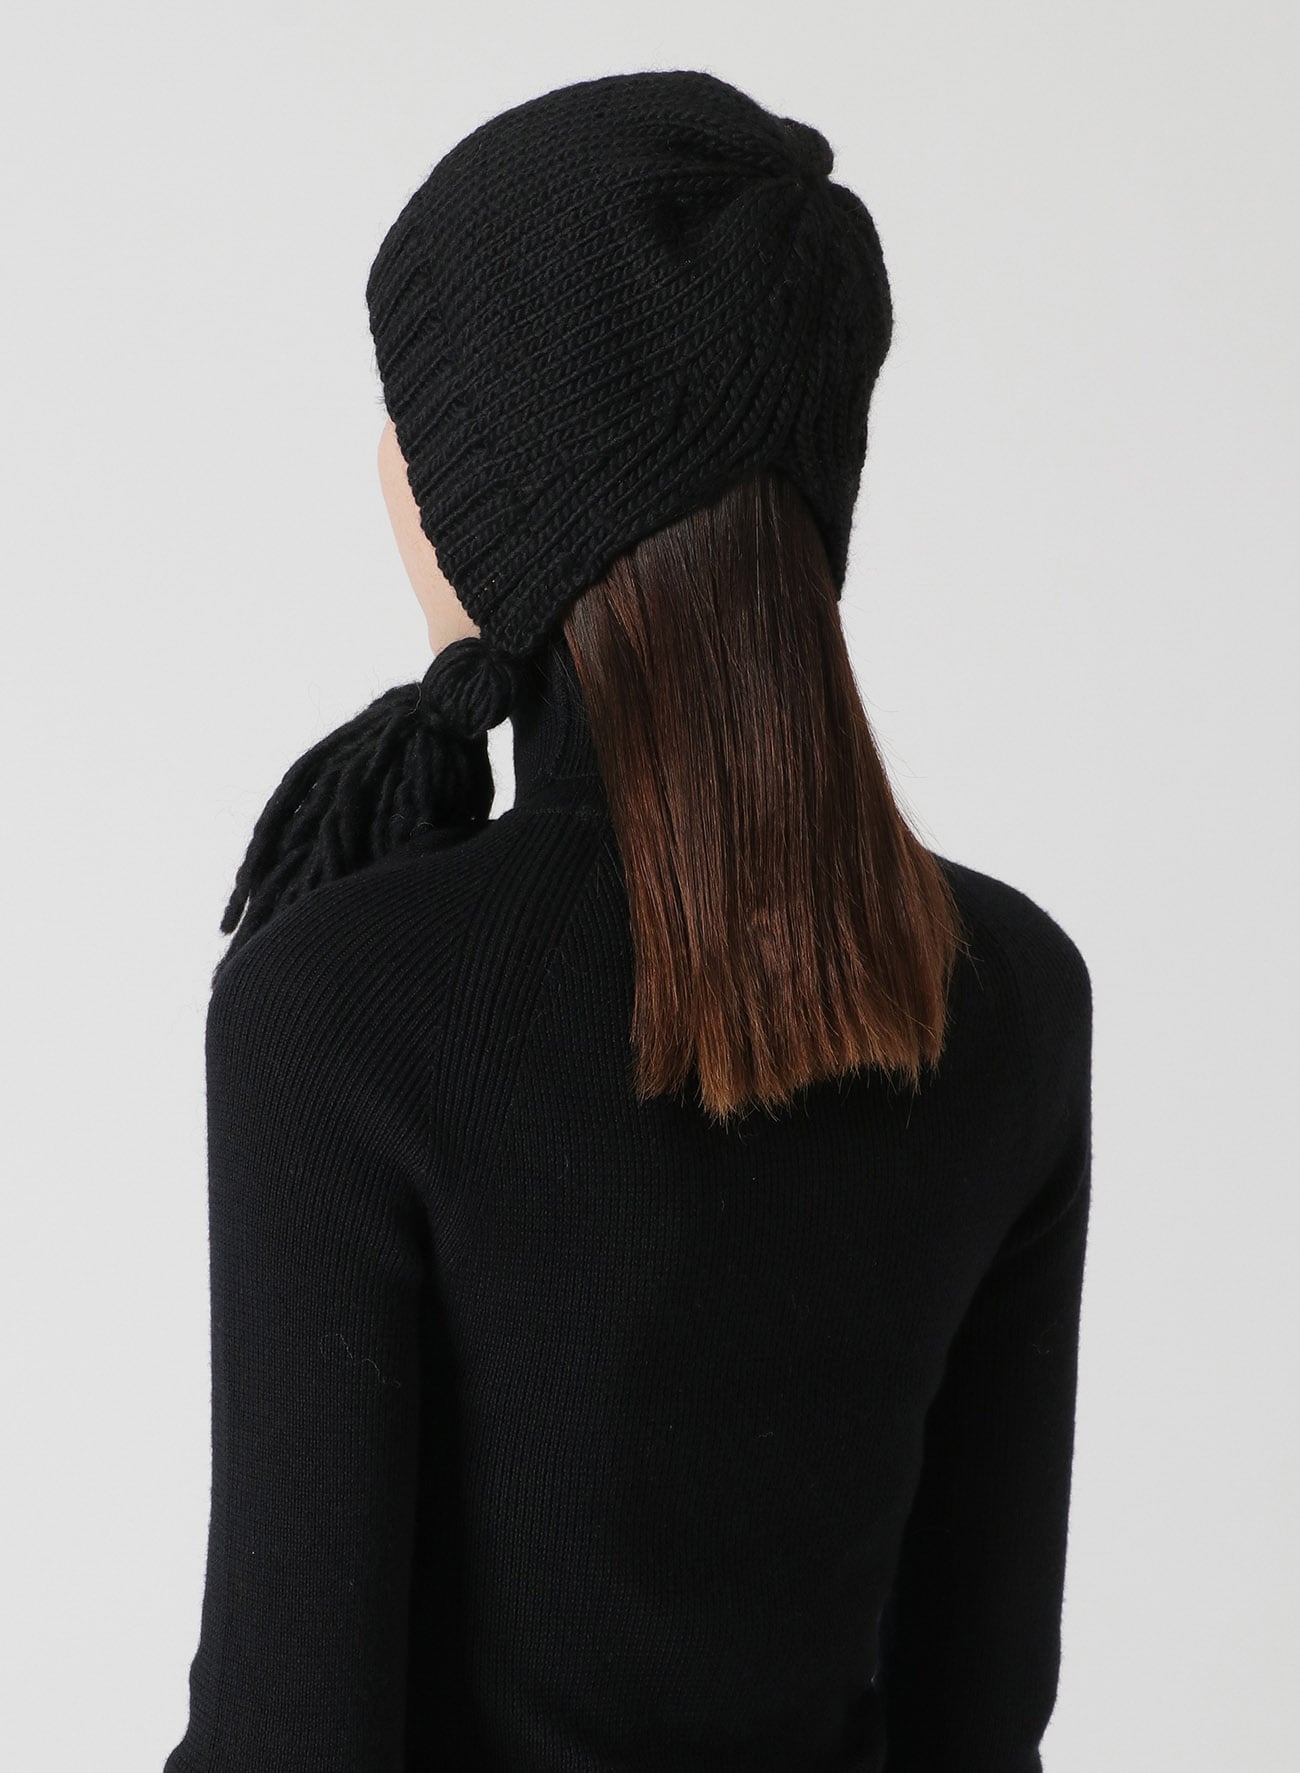 KNITTED WOOL JERSEY HAT WITH TASSELS(FREE SIZE Black): LIMI feu